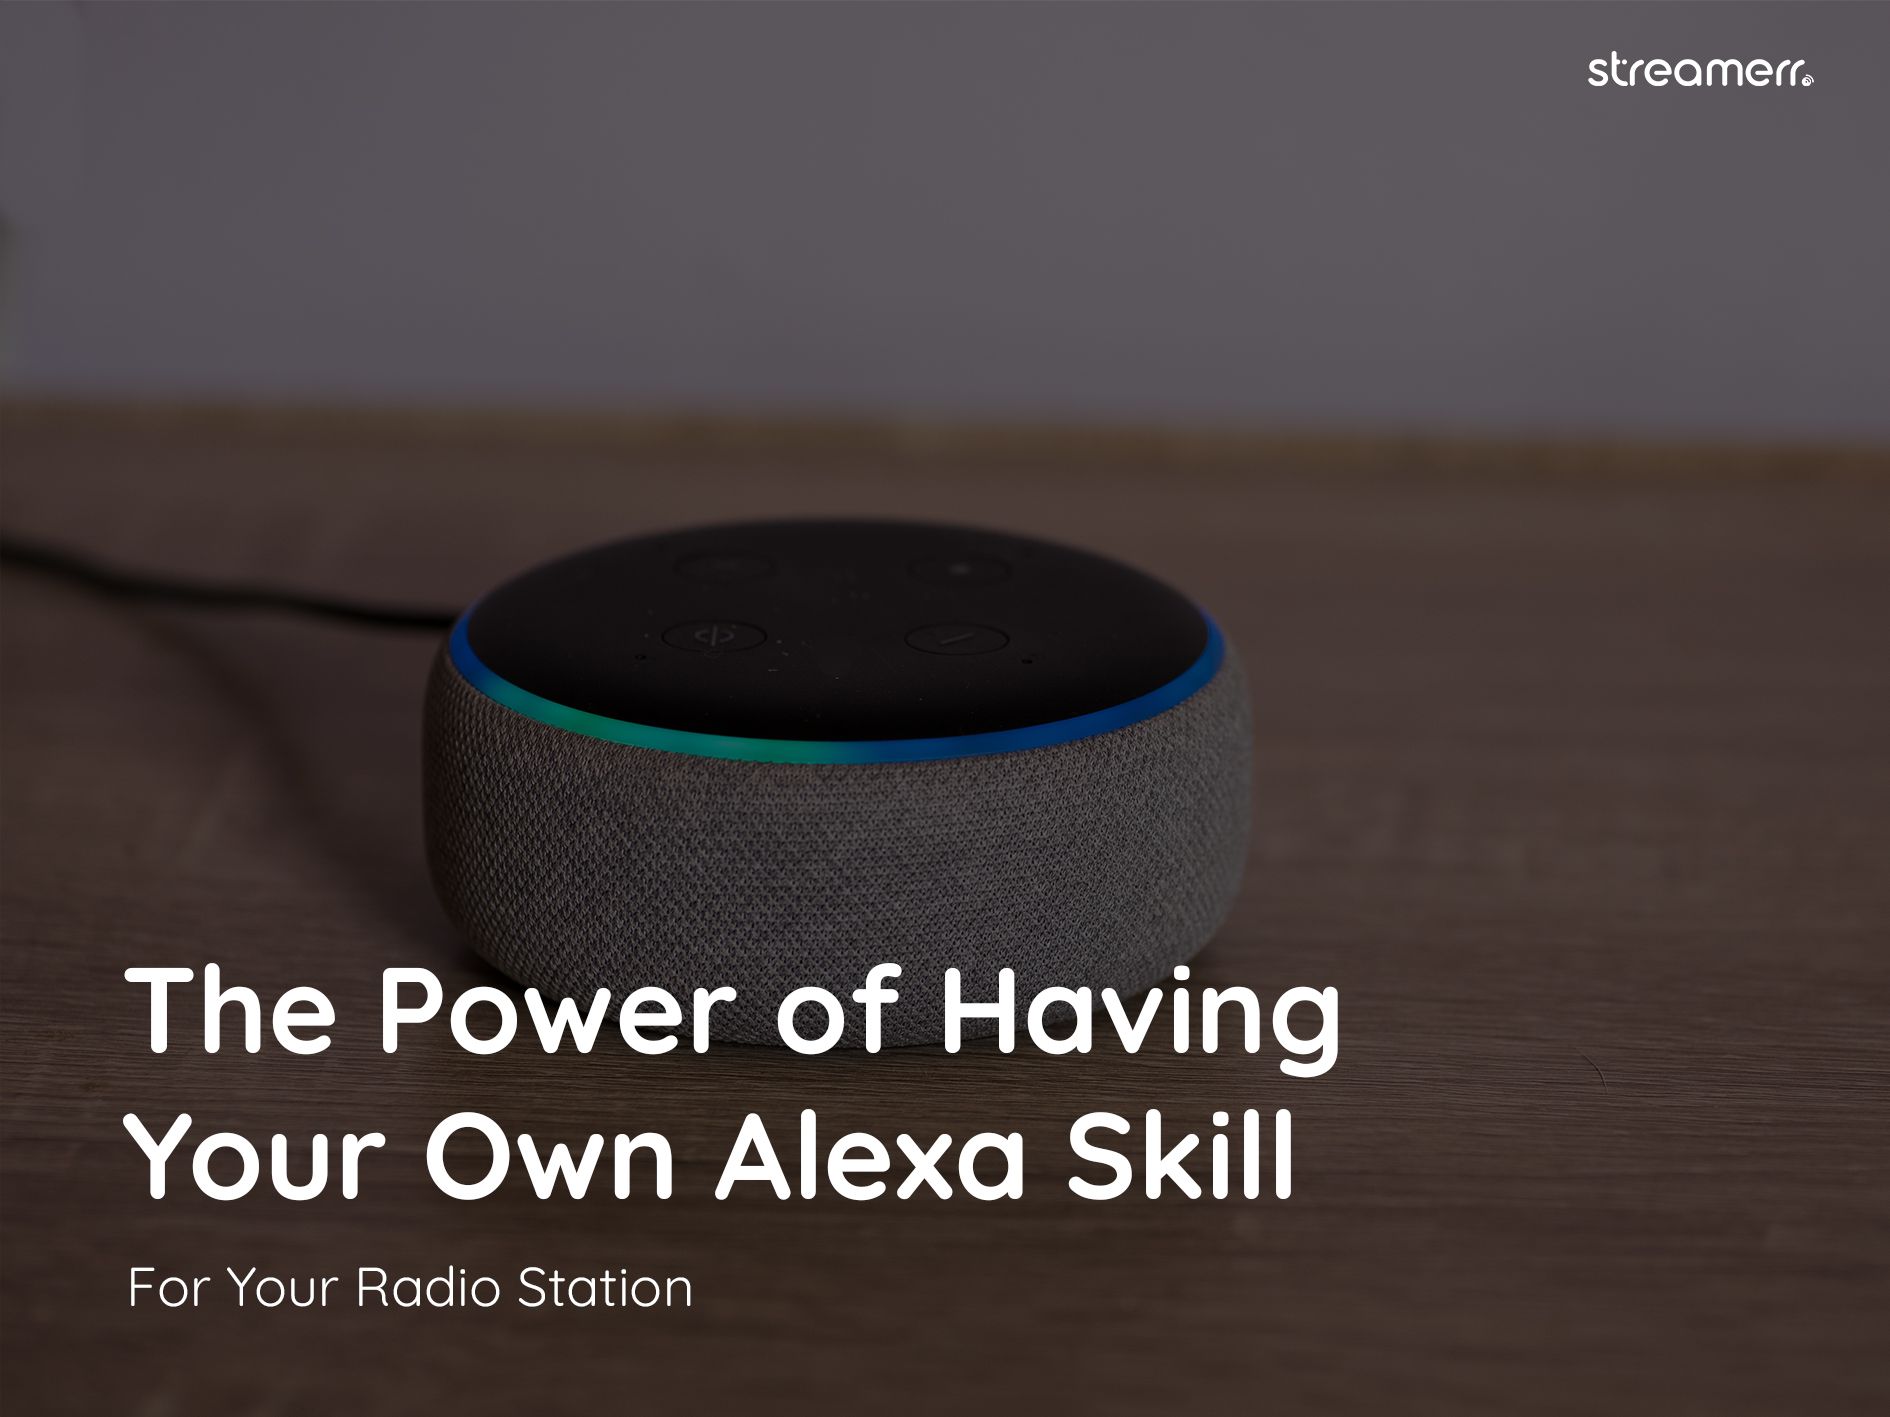 The Power of Having Your Own Alexa Skill for Your Radio Station